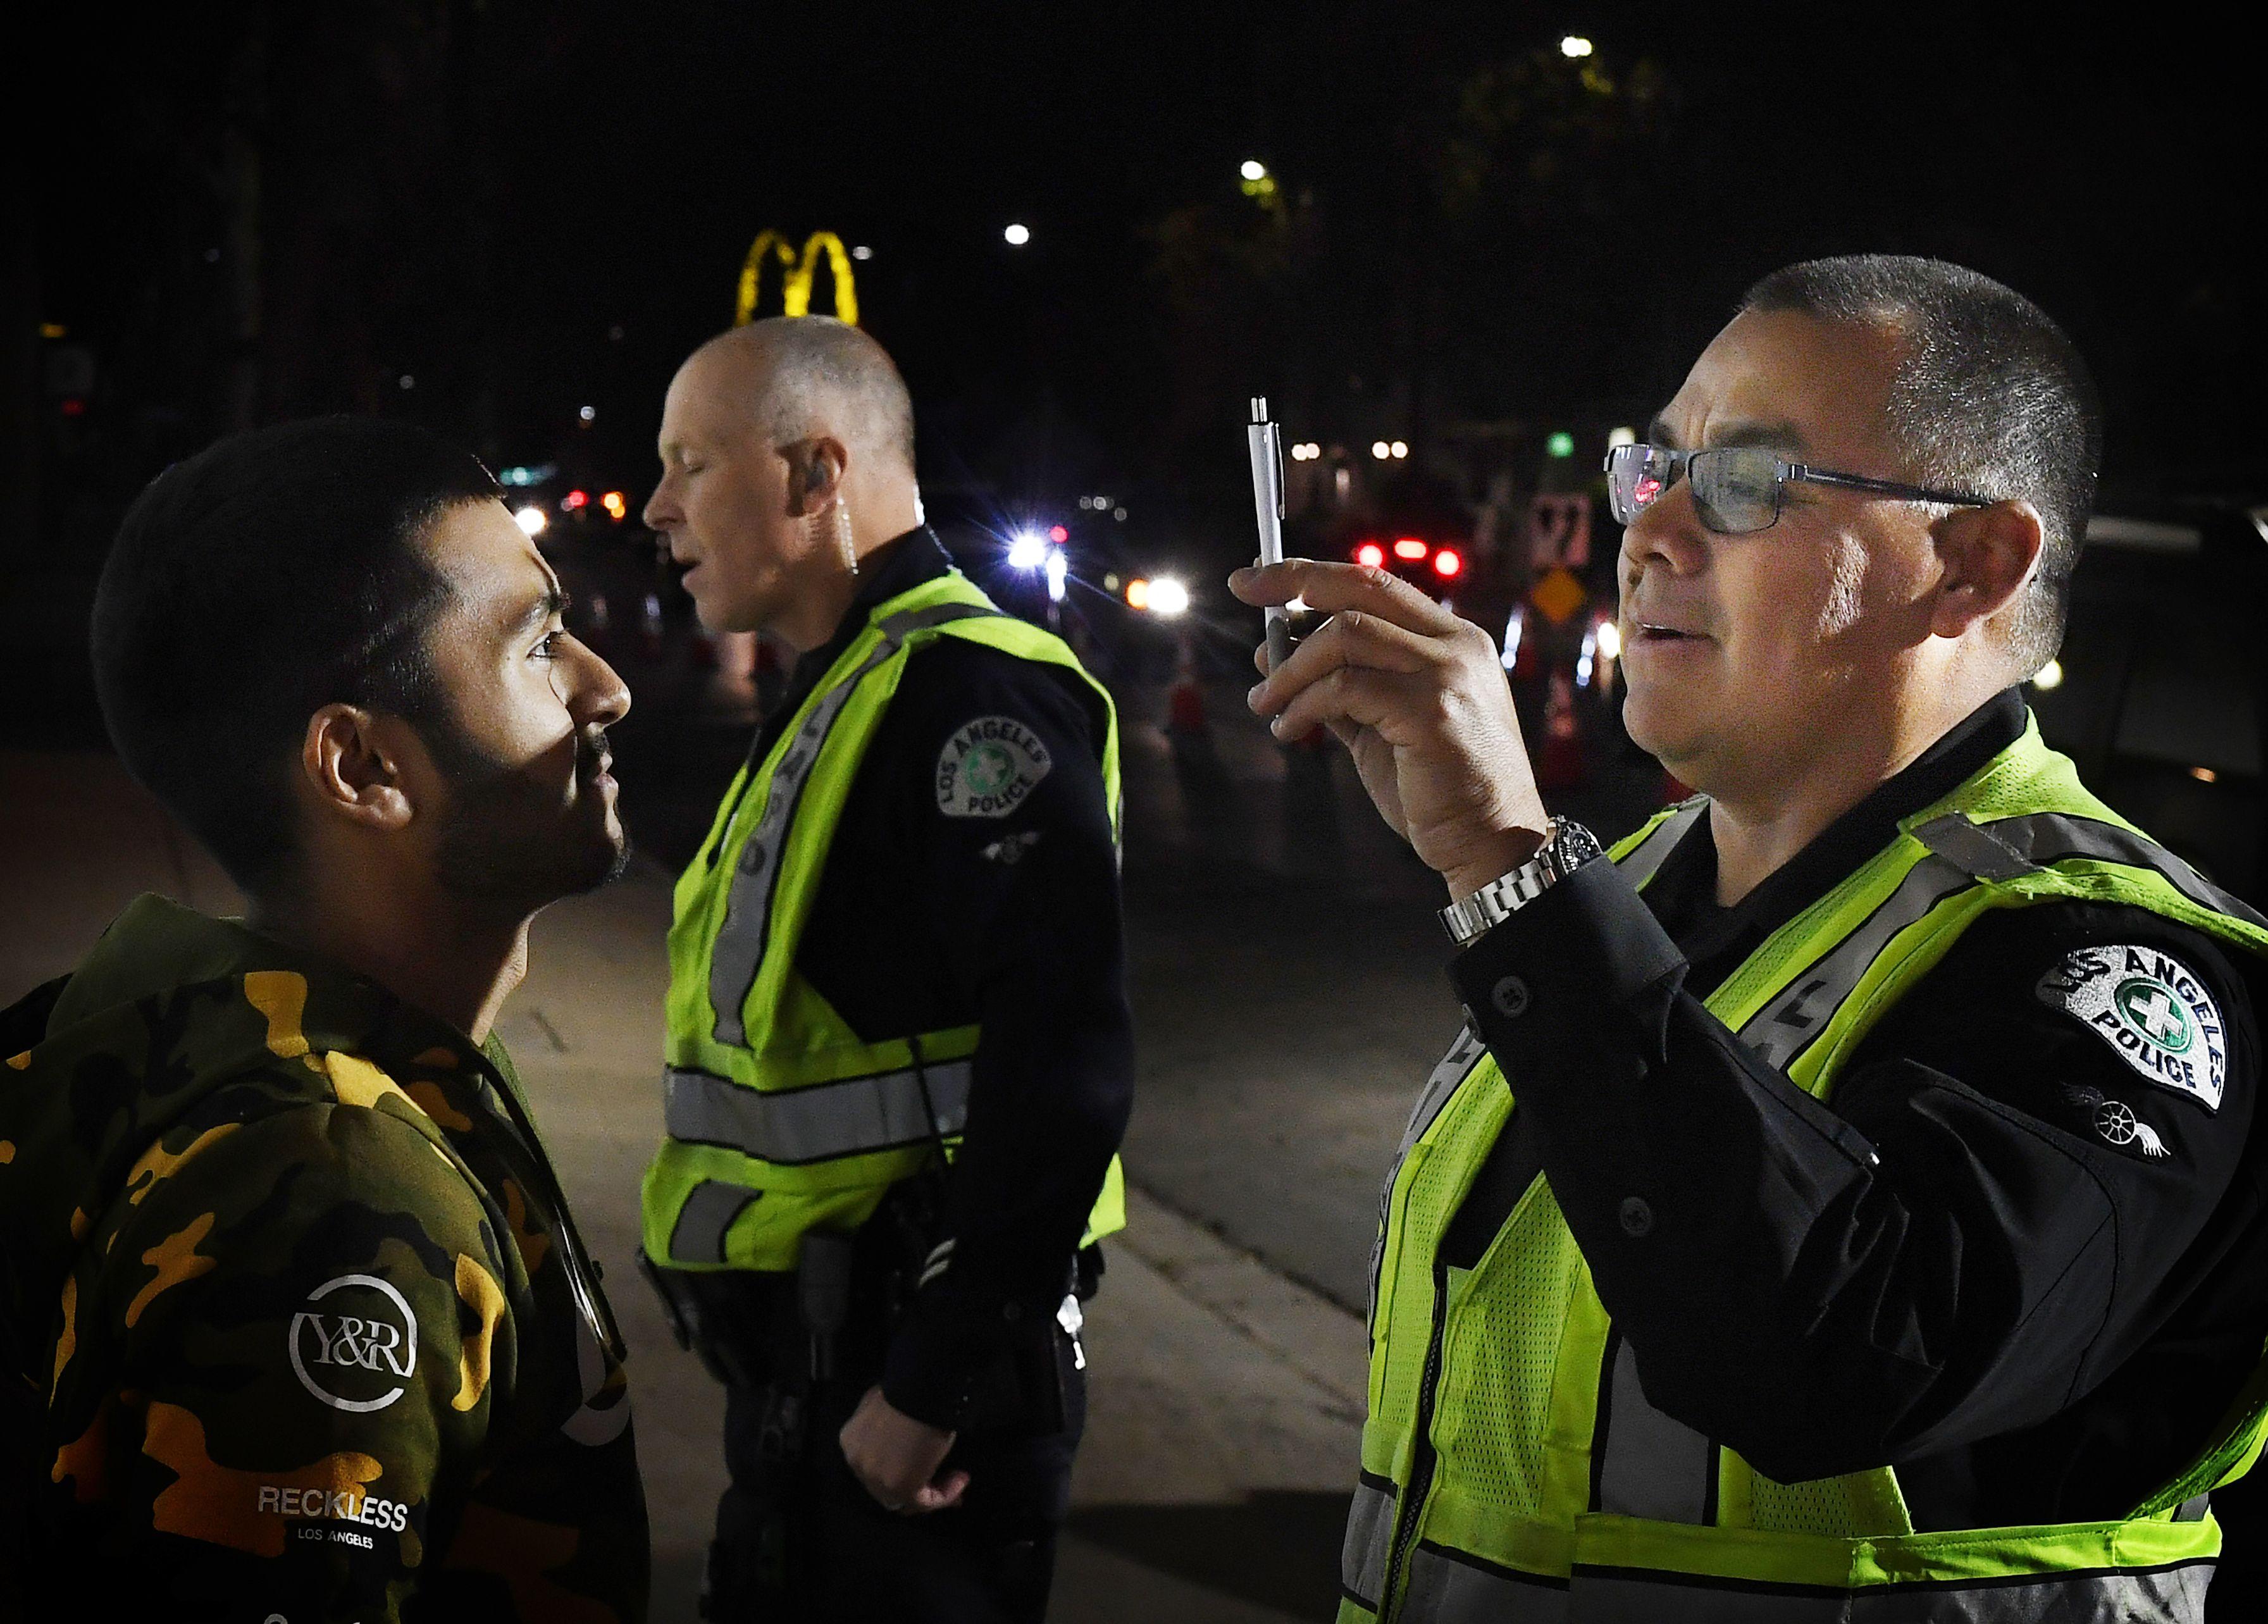 California Resolution Preventing Lawmakers Convicted of DUI From Using Government Vehicles Blocked by Committee